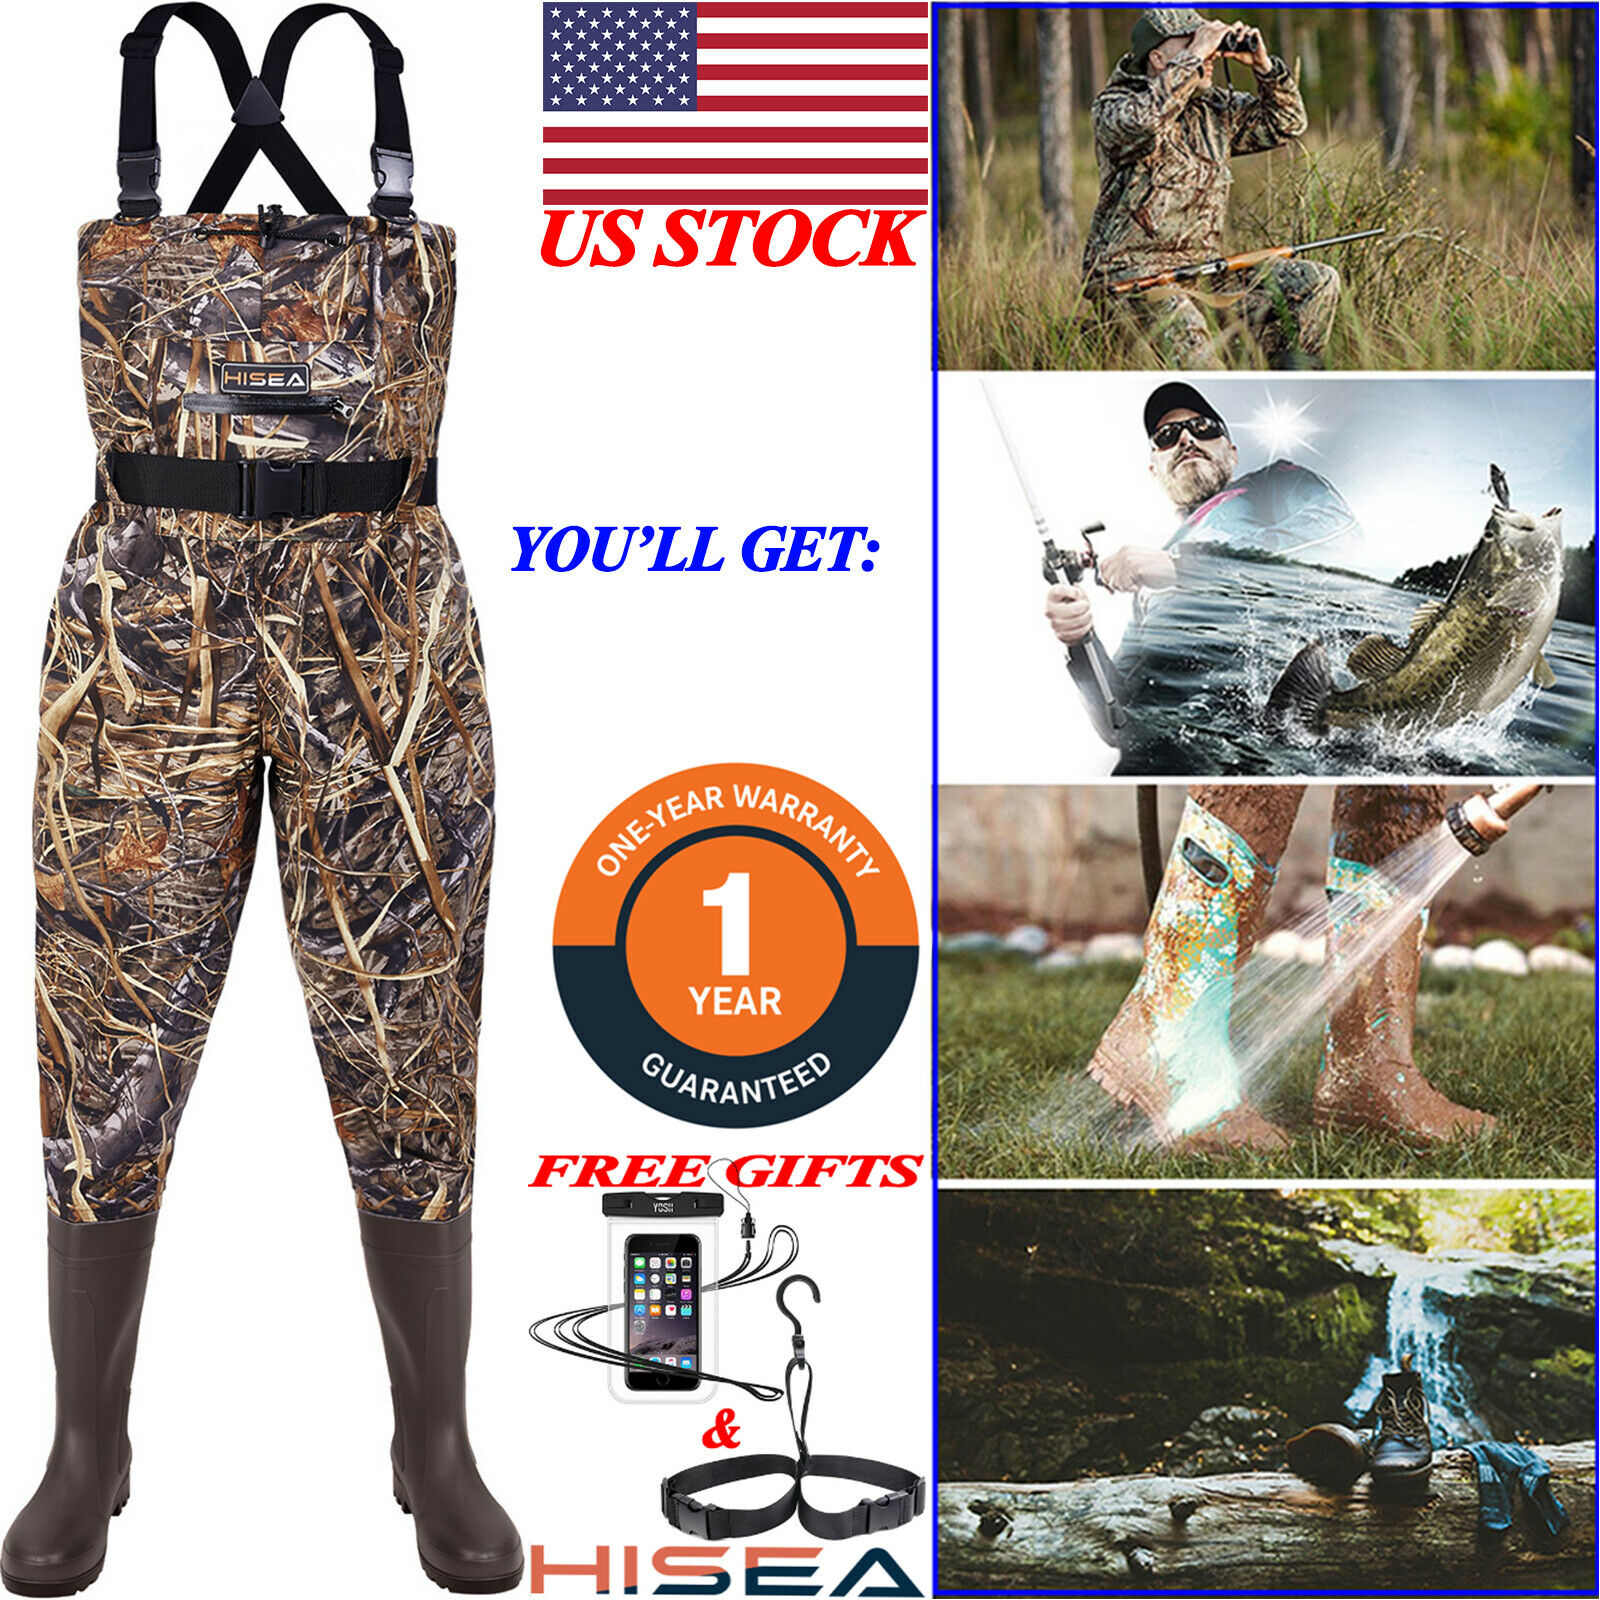 Hisea Chest Waders Nylon 2-ply Waterproof Cleated Bootfoot Hunting Fishing Wader